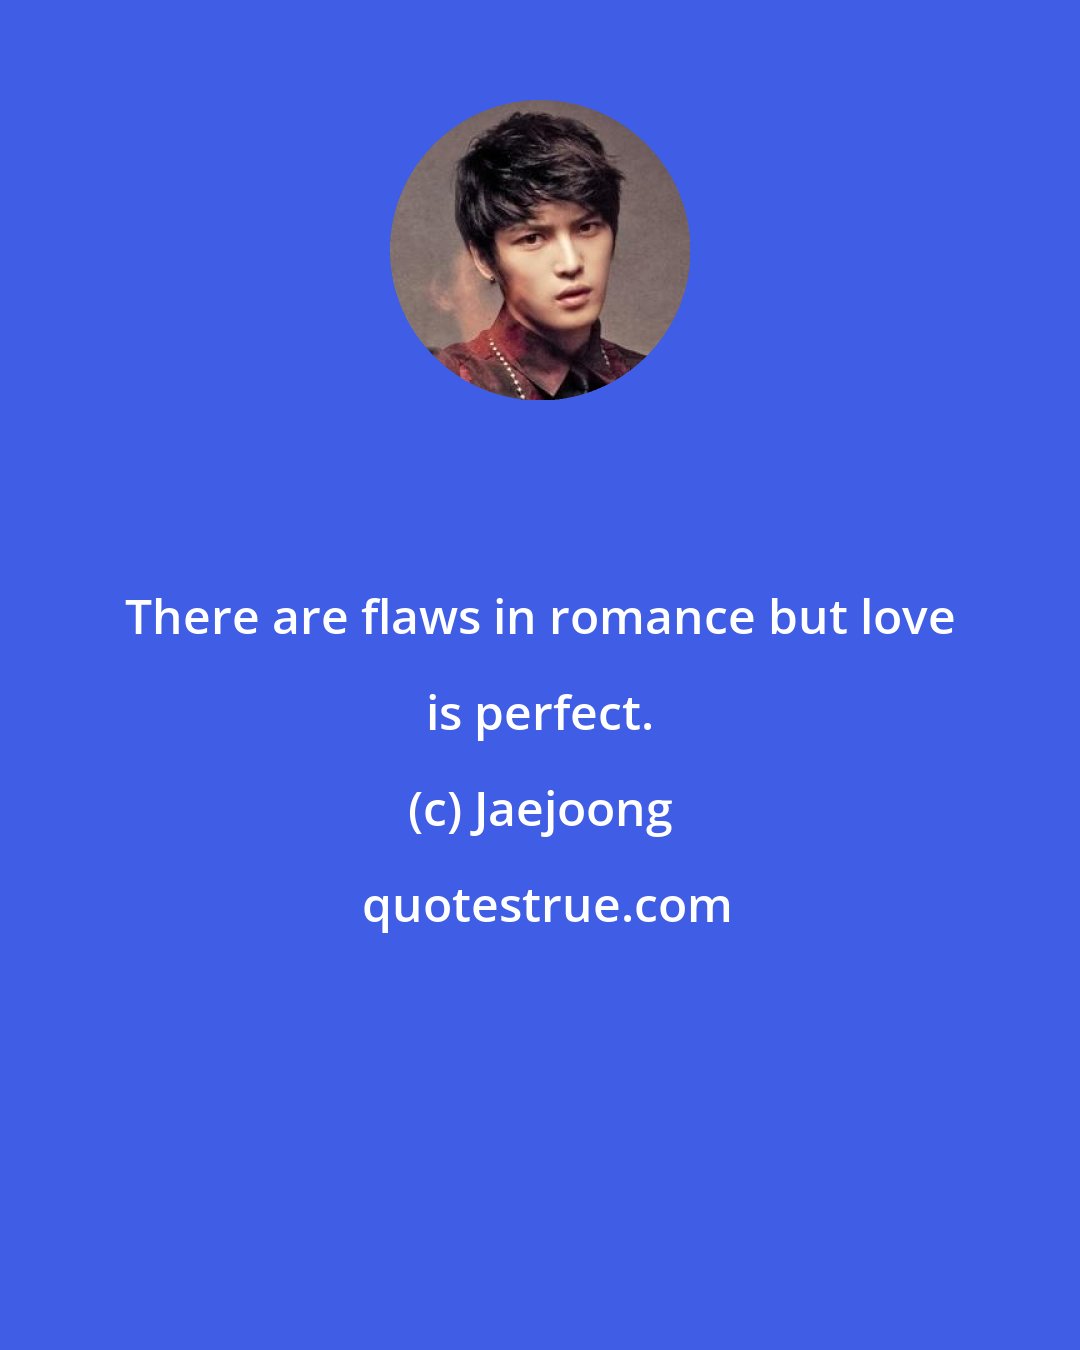 Jaejoong: There are flaws in romance but love is perfect.